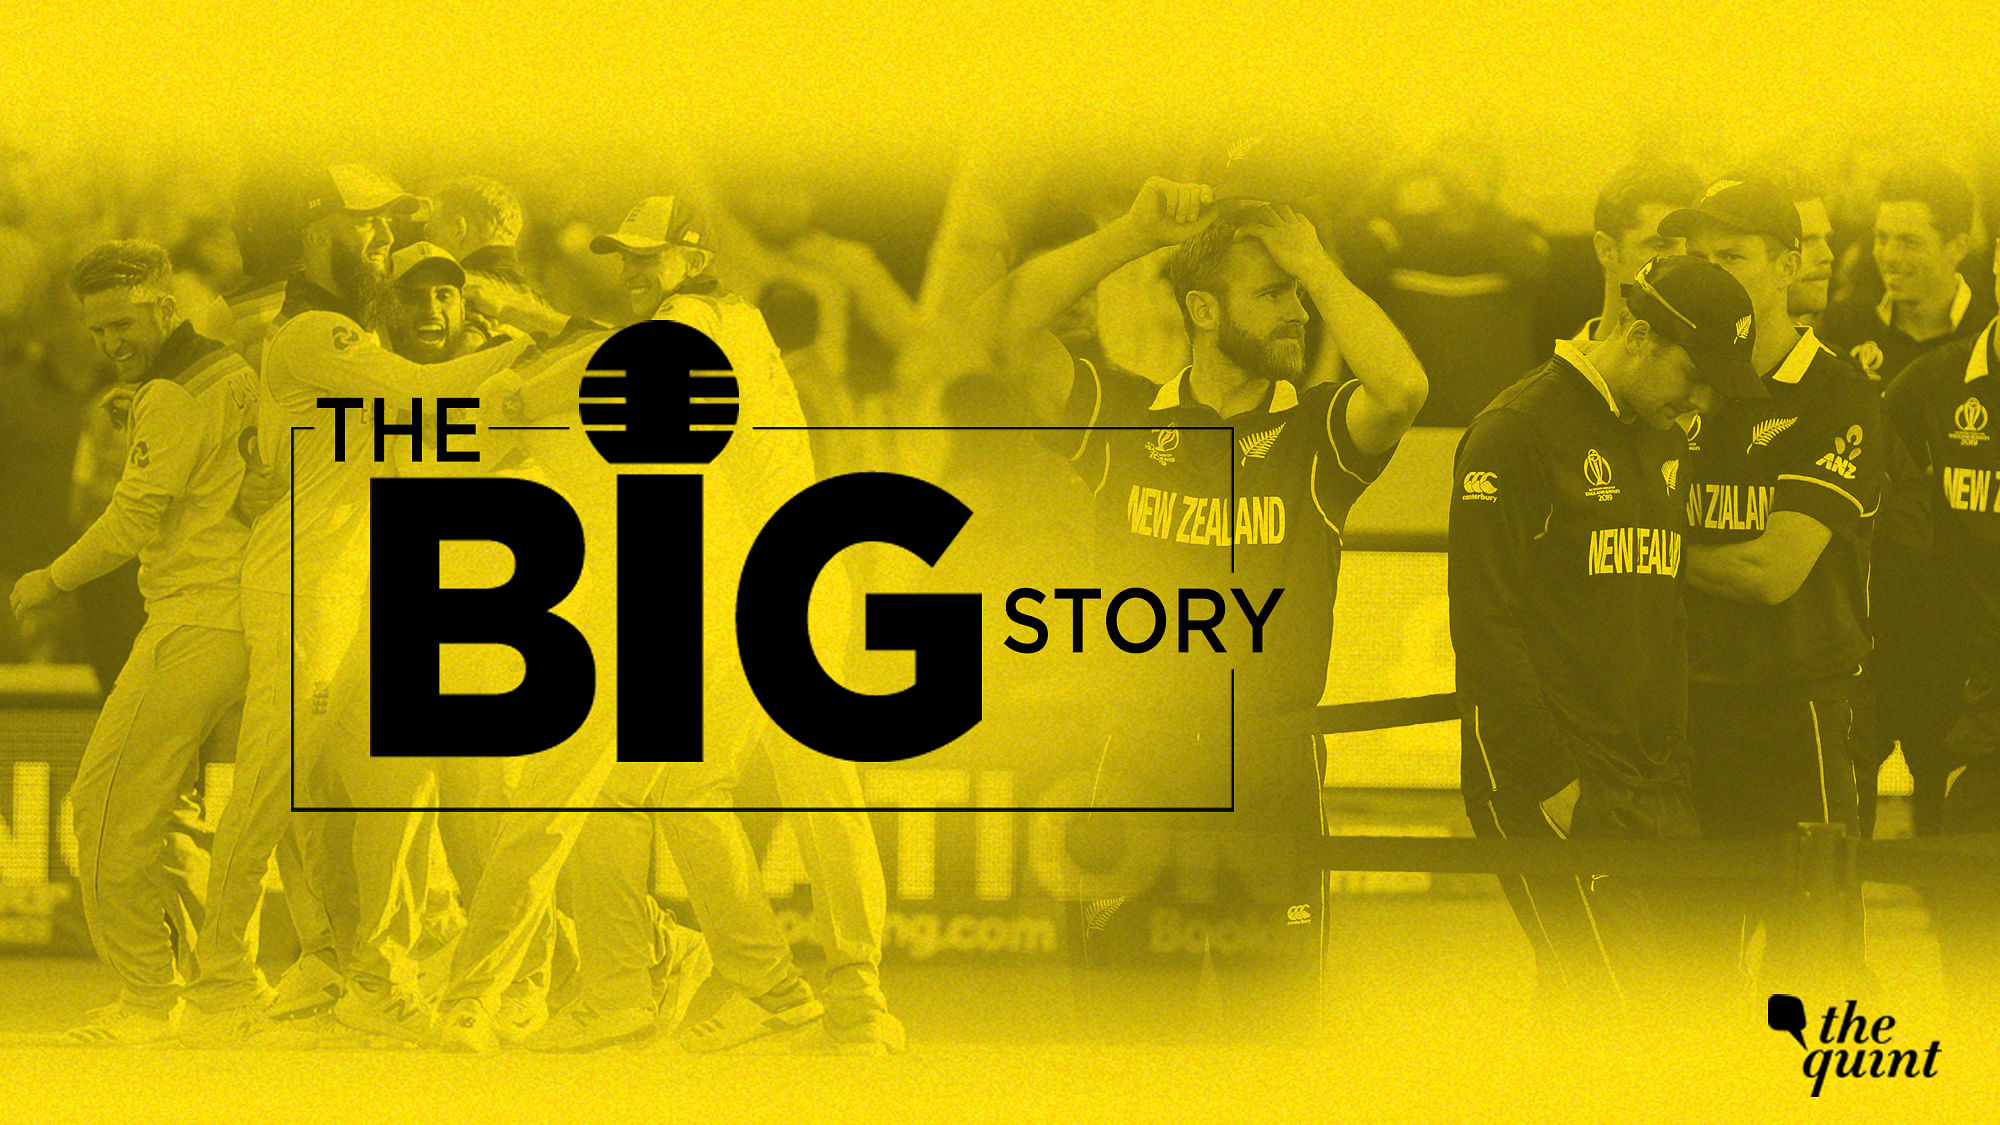 On this episode of The Big Story, we discuss the 2019 Cricket World Cup final between England and New Zealand.